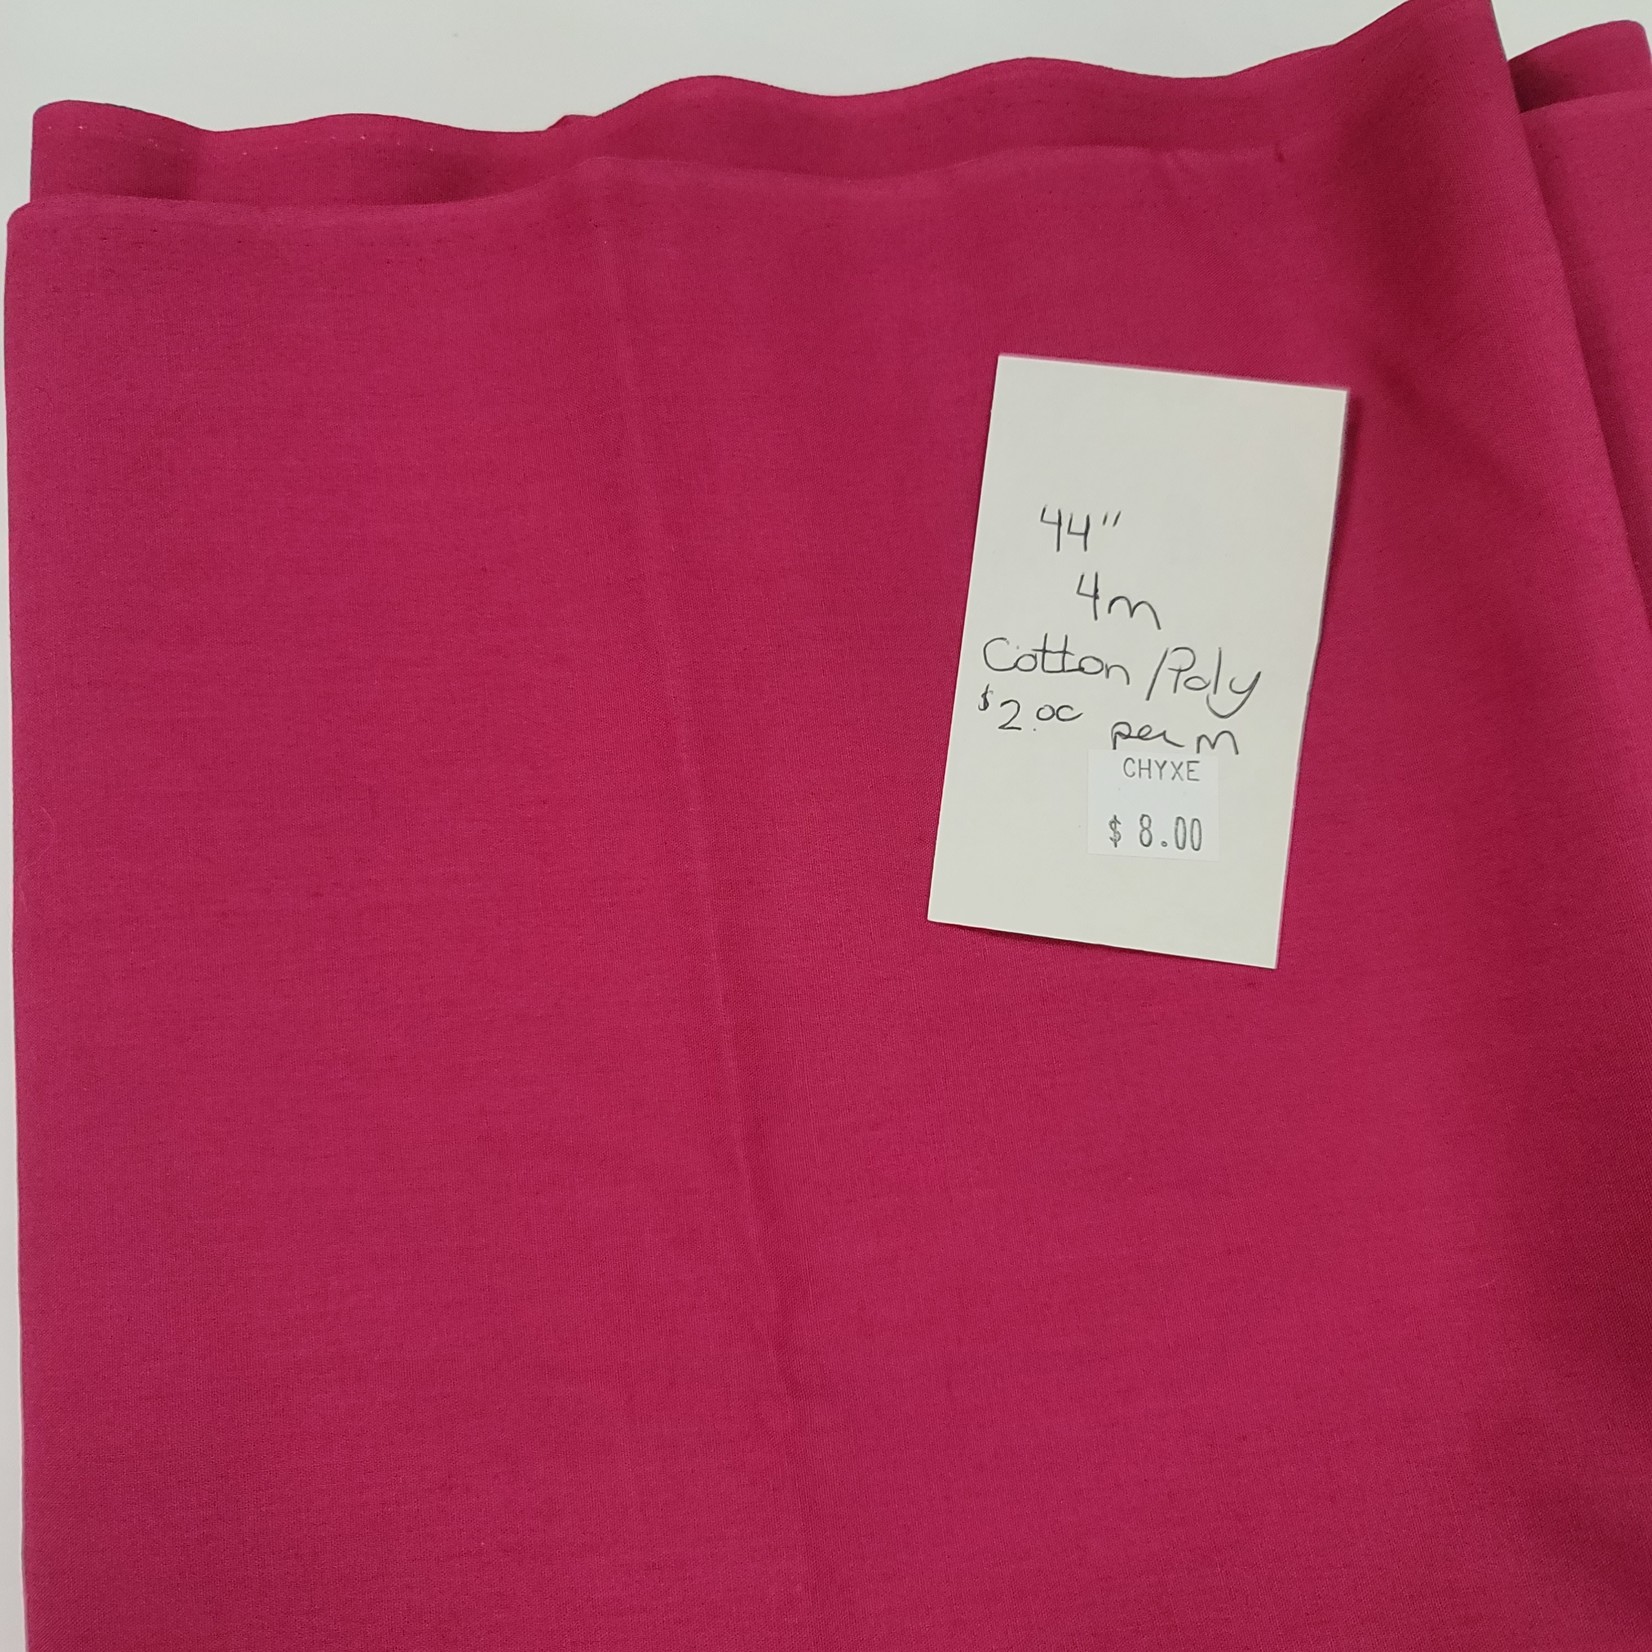 Cotton/Poly Fabric - 44" x 4m - Bright Pink